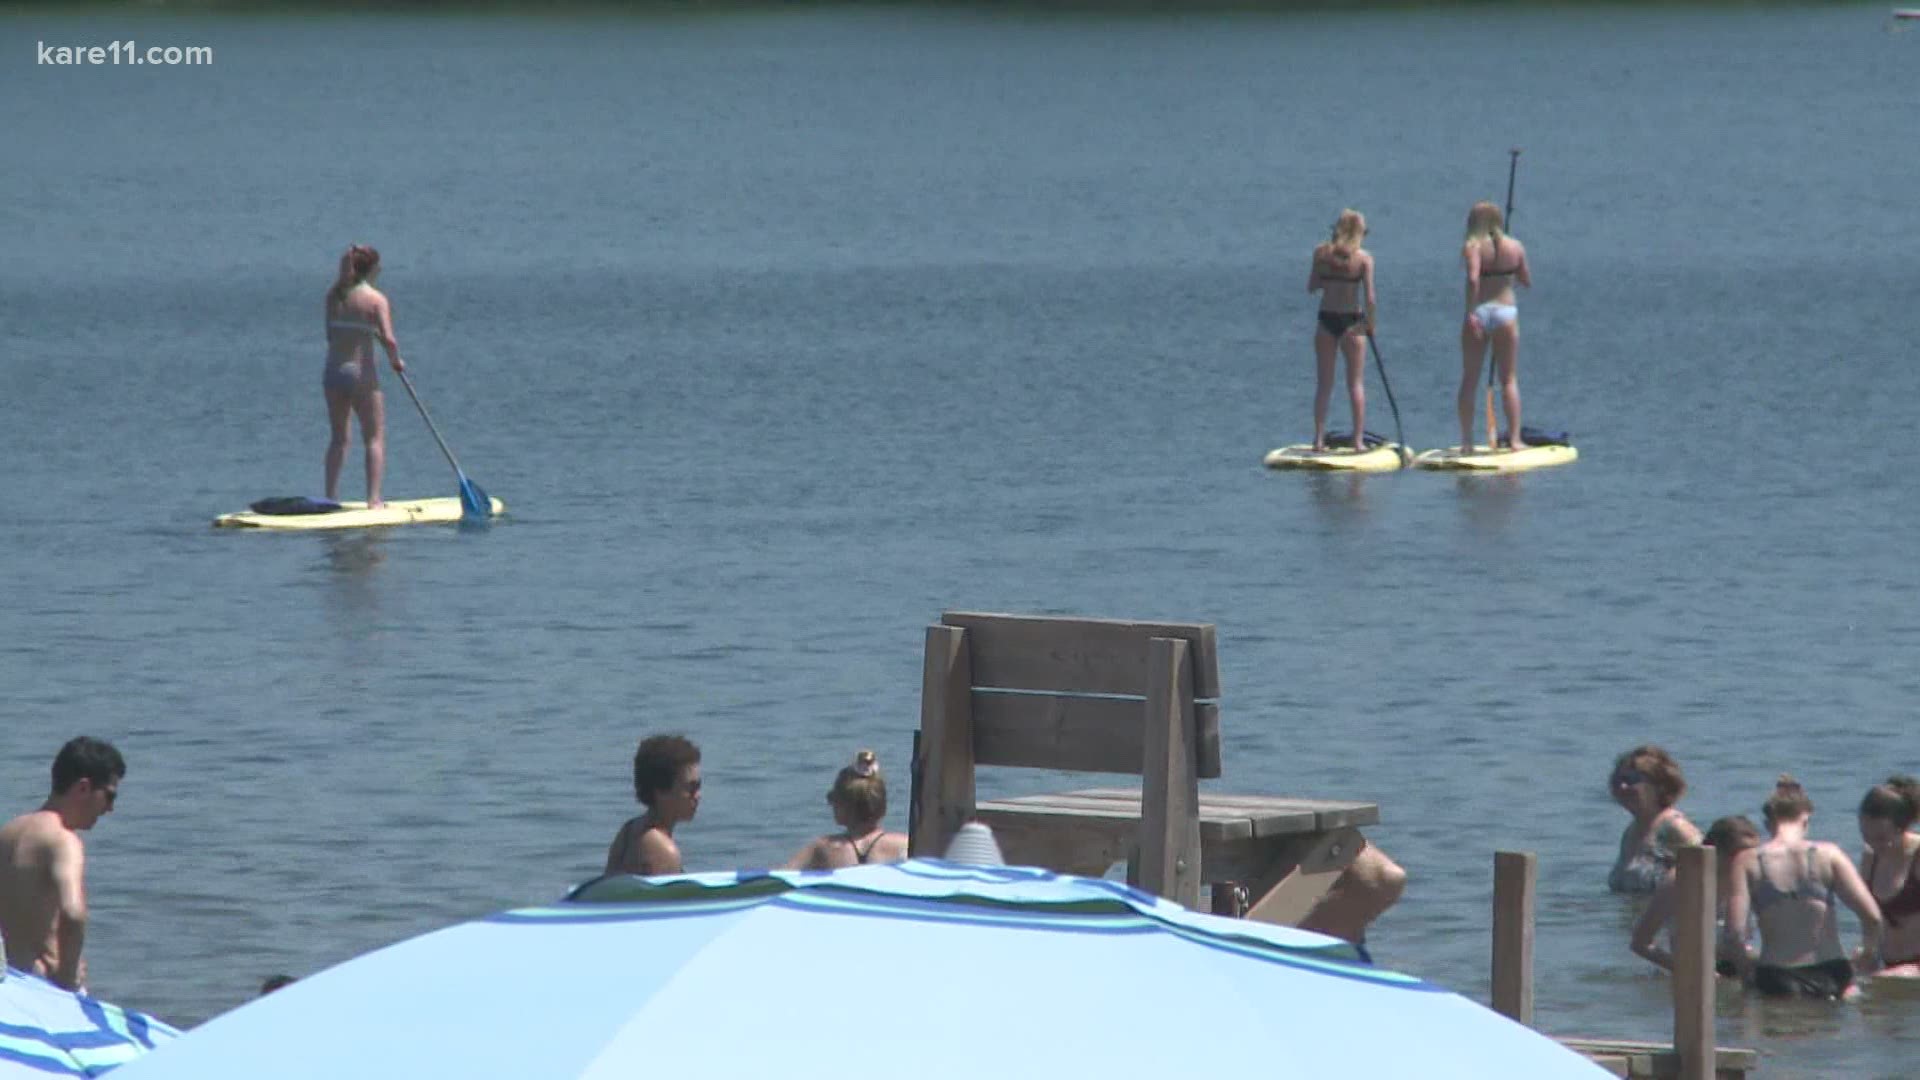 Dr. Jim Miner from Hennepin Healthcare has some tips for swimming safely in Minnesota's lakes this holiday weekend.